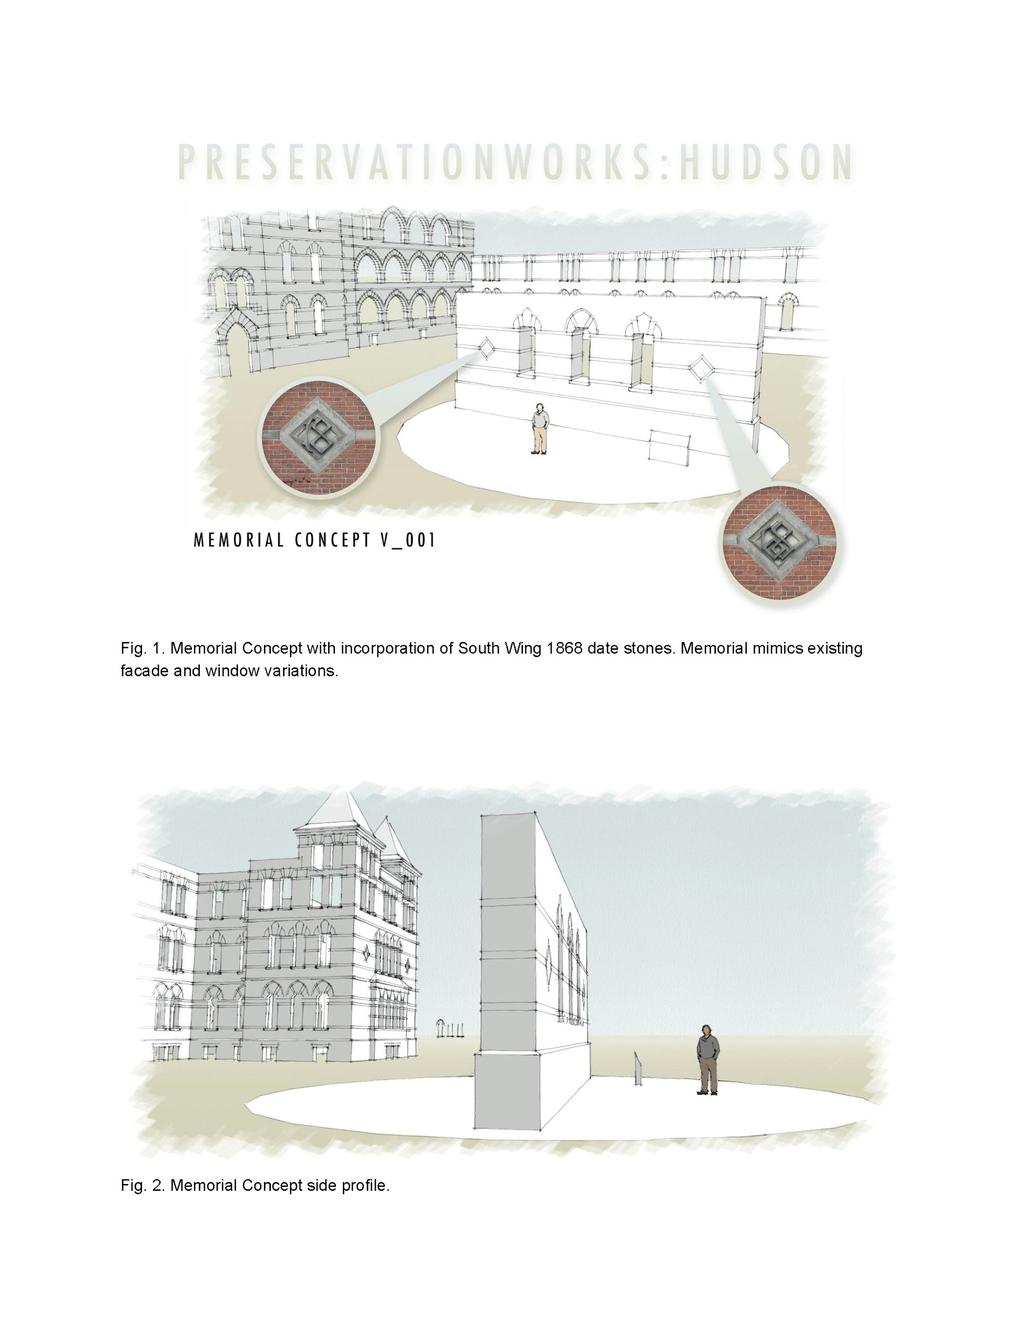 Memorial Concept 1: Freestanding Memorial incorporating salvaged architectural details from suggested list. Create a memorial to be located near the furthest extent of South Wing.